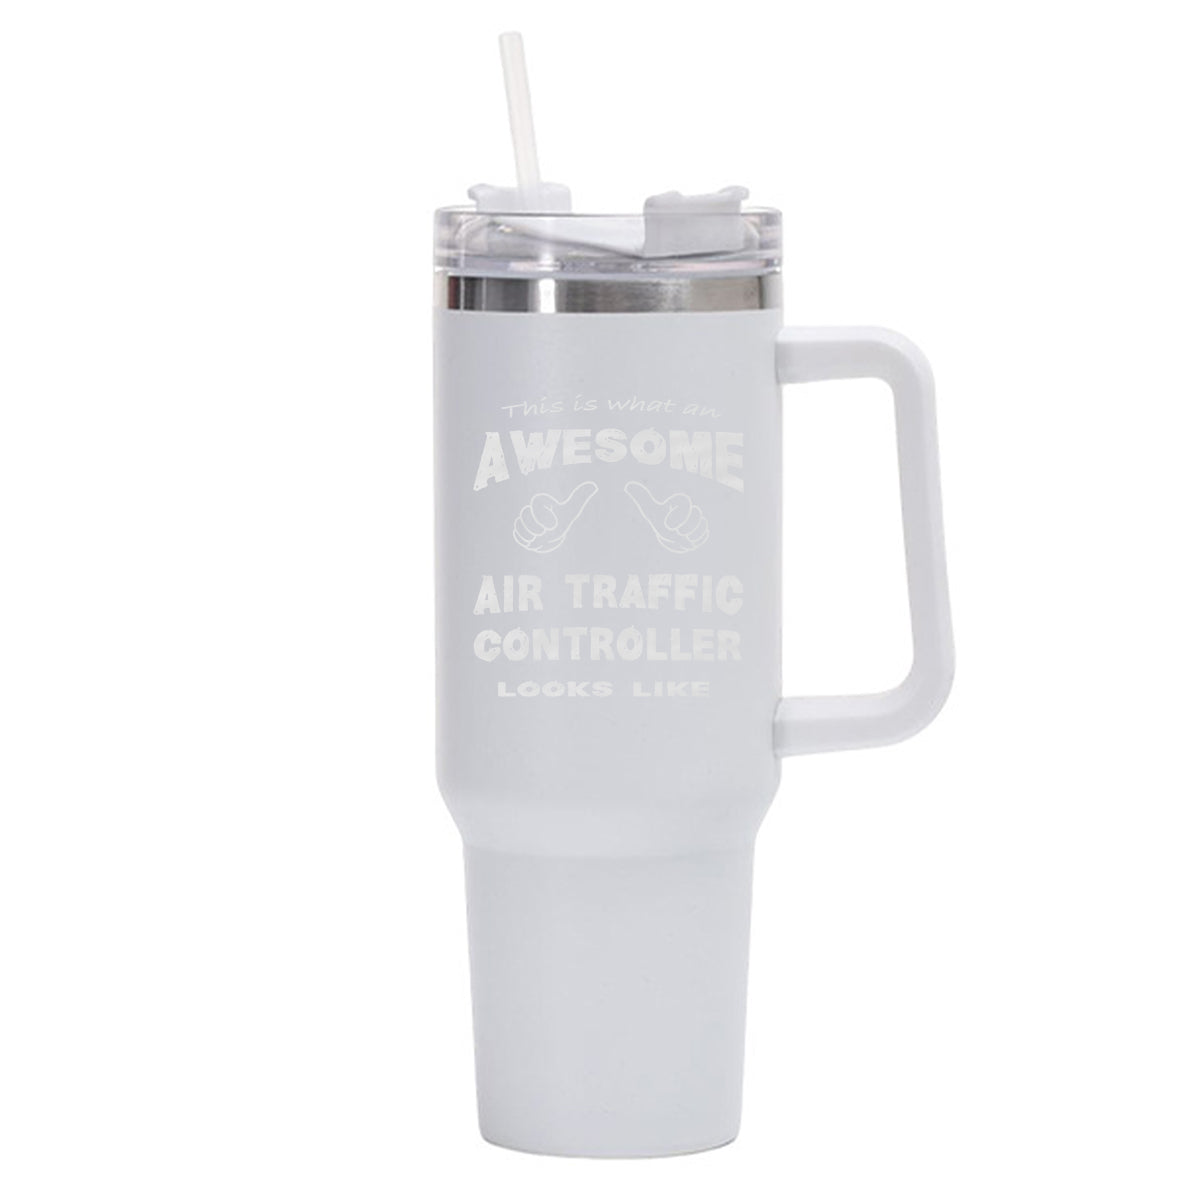 Air Traffic Controller Designed 40oz Stainless Steel Car Mug With Holder